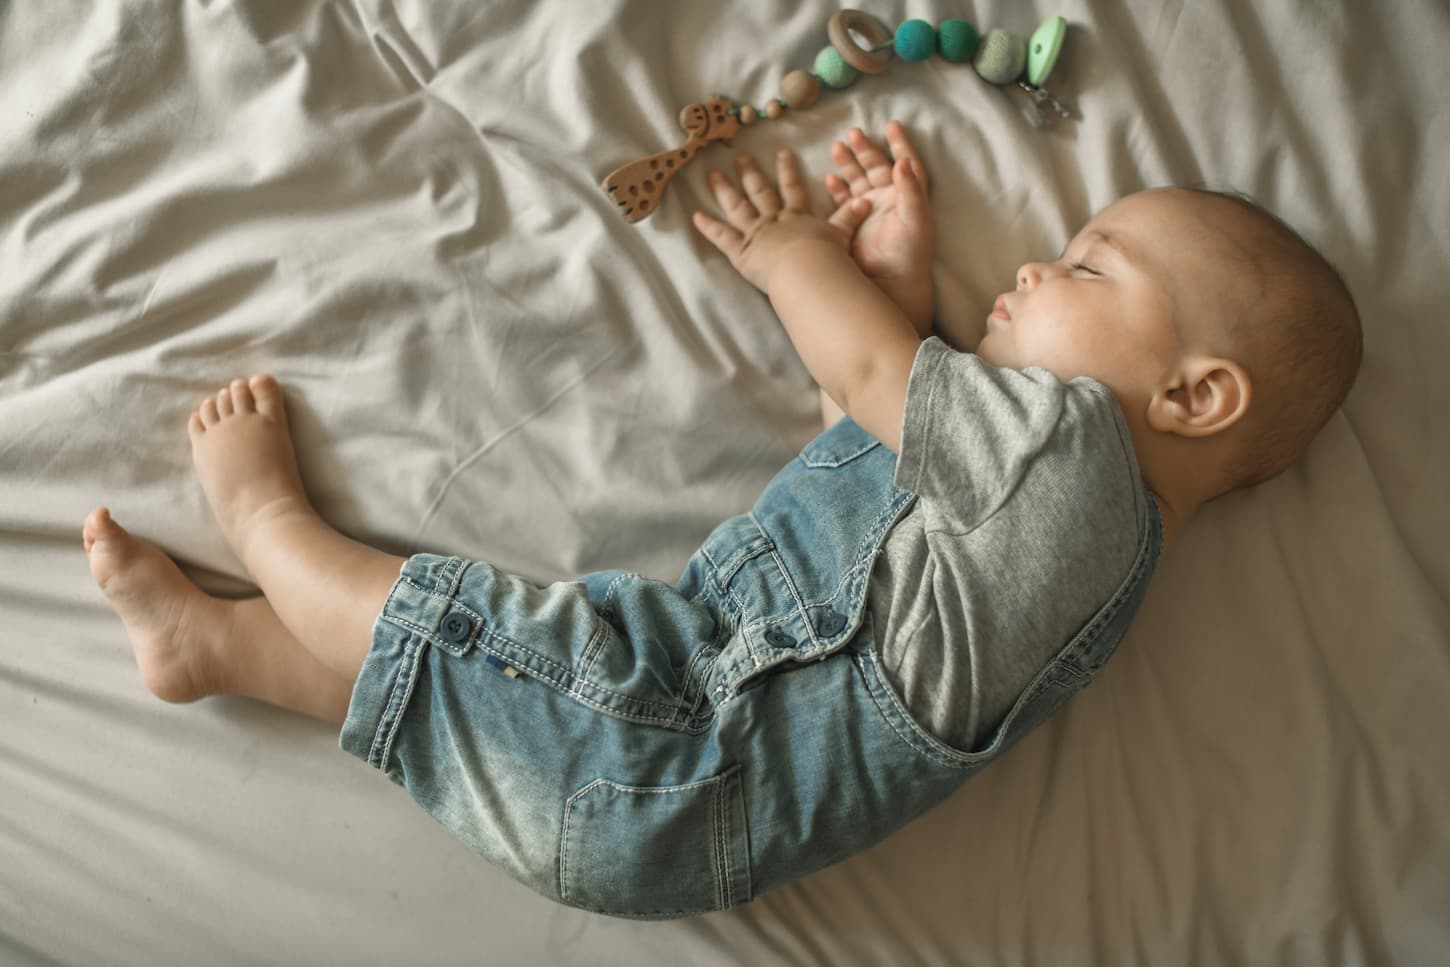 An image of a 7-month-old baby sleeping with a juniper toy.